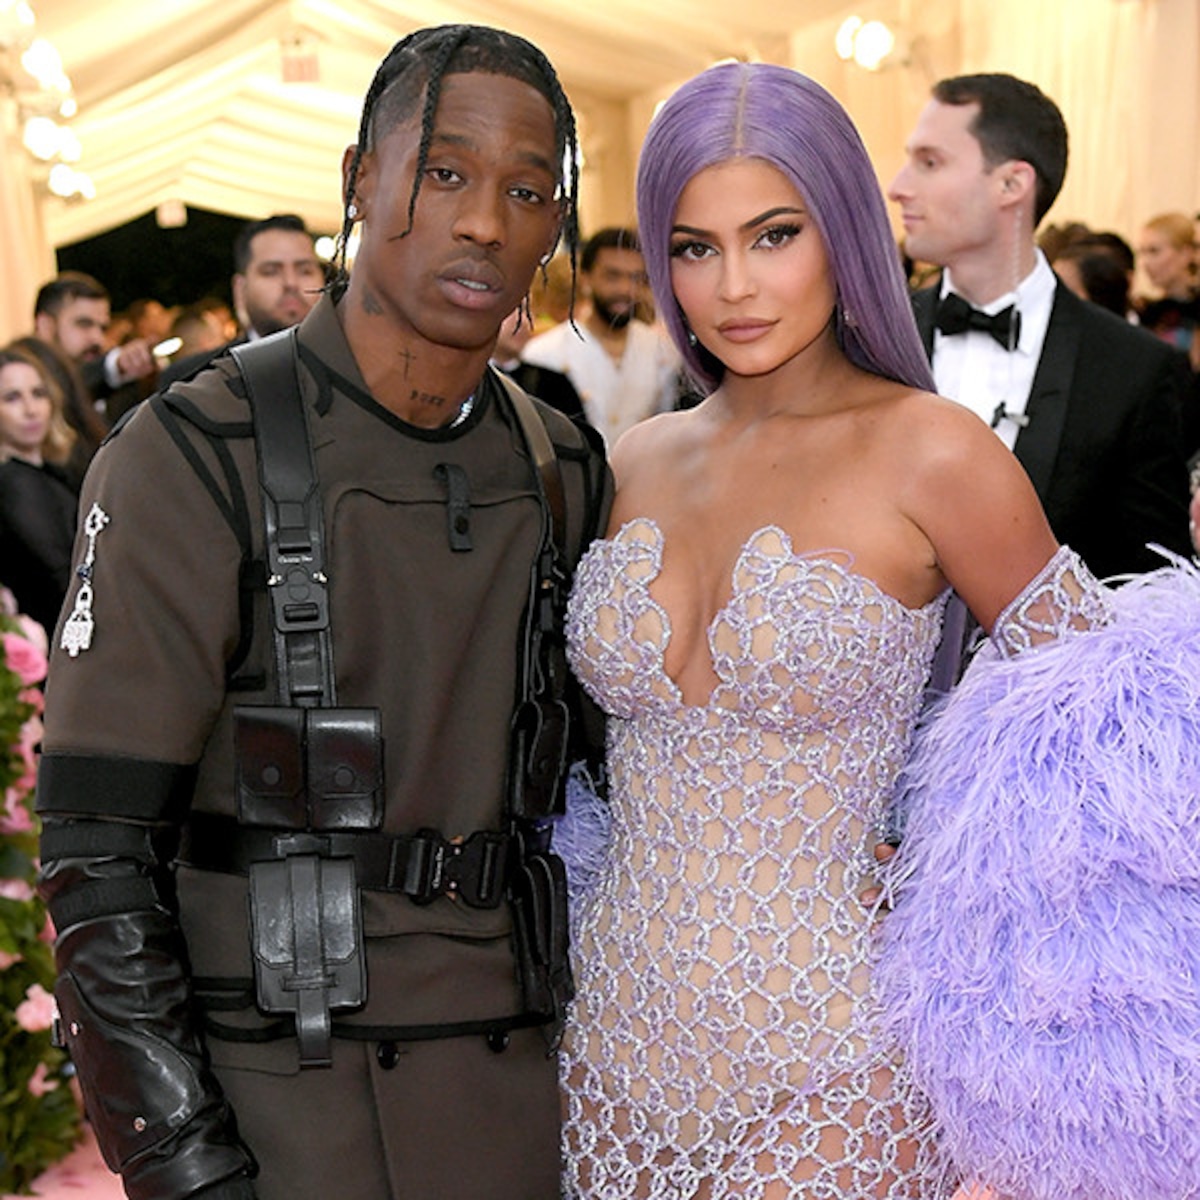 Kylie Jenner And Travis Scott Bring Power To Met Gala Red Carpet - E! Online